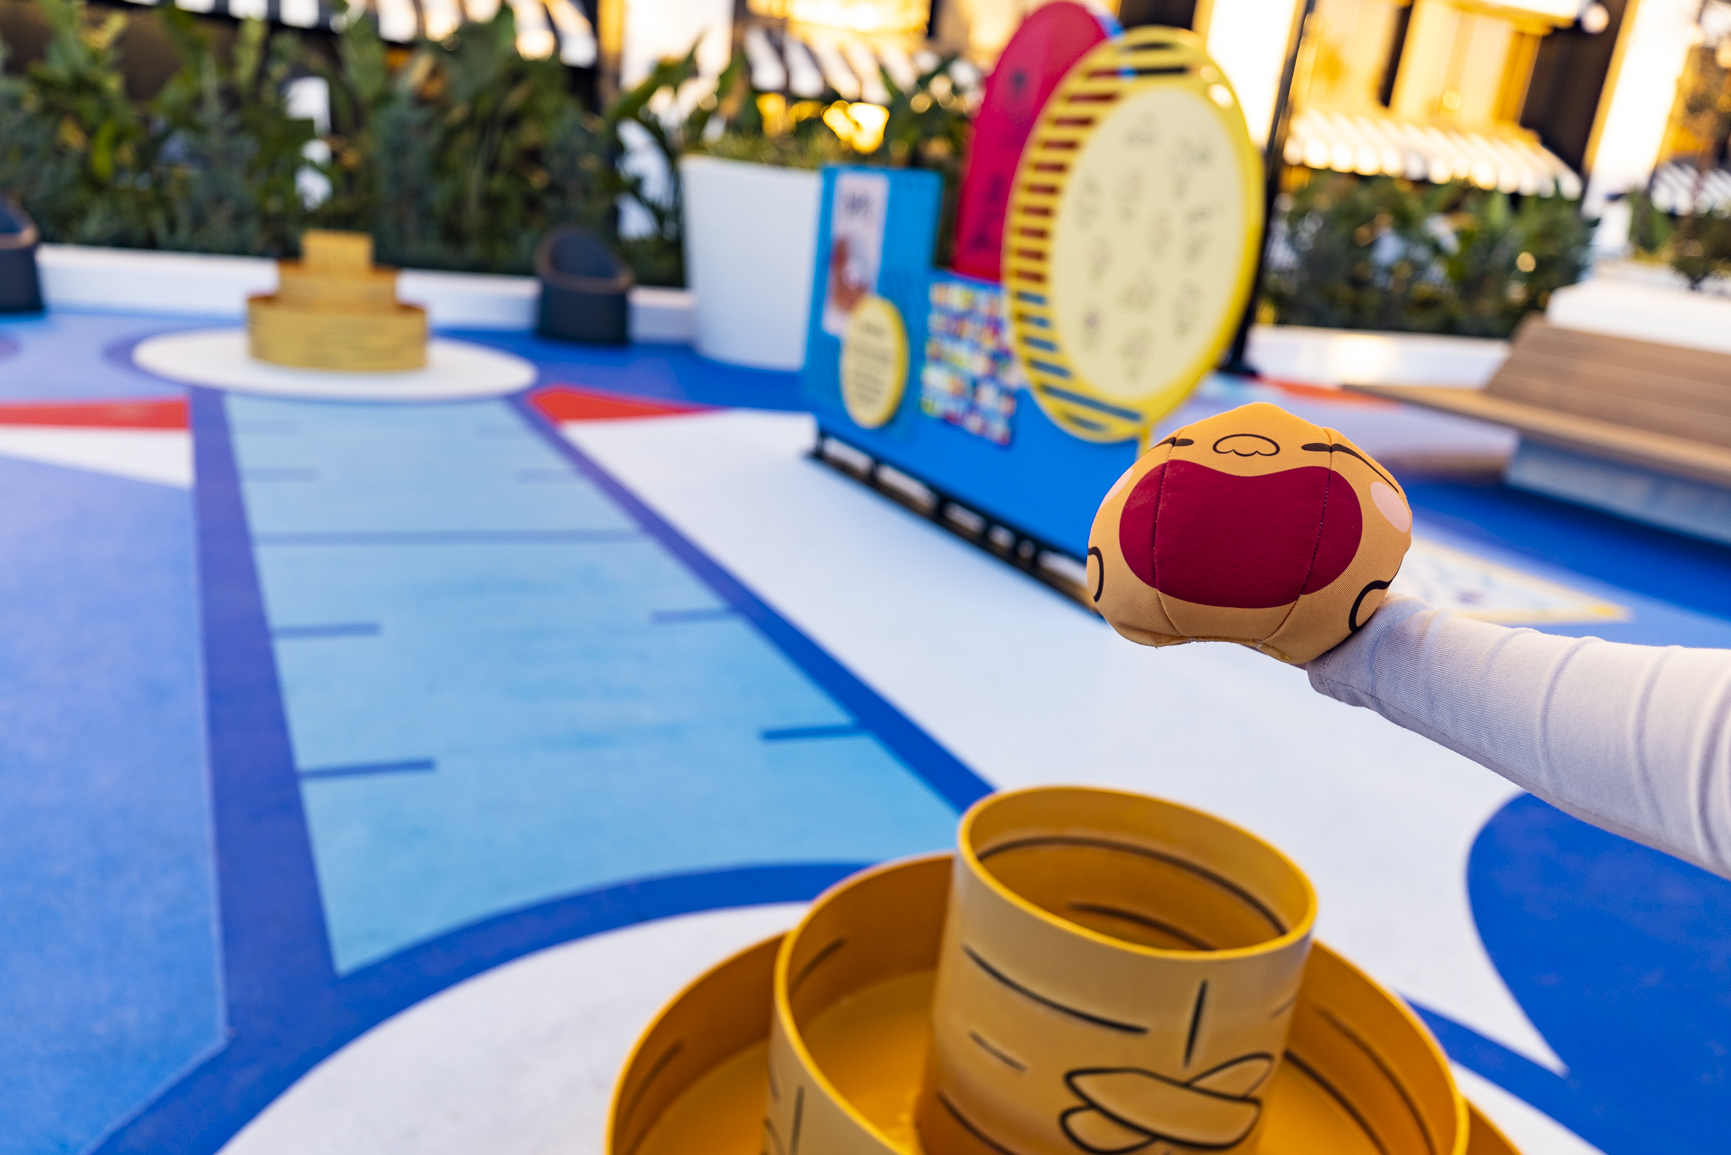 Guests can enjoy their stay by heading to the Pixar Shorts Court on the rooftop deck of Pixar Place Hotel at Disneyland Resort in Anaheim, Calif., with interactive games and imaginative free play inspired by Pixar’s famous short films “La Luna,” “Bao,” “For the Birds” and “Burrow.” (Christian Thompson/Disneyland Resort)